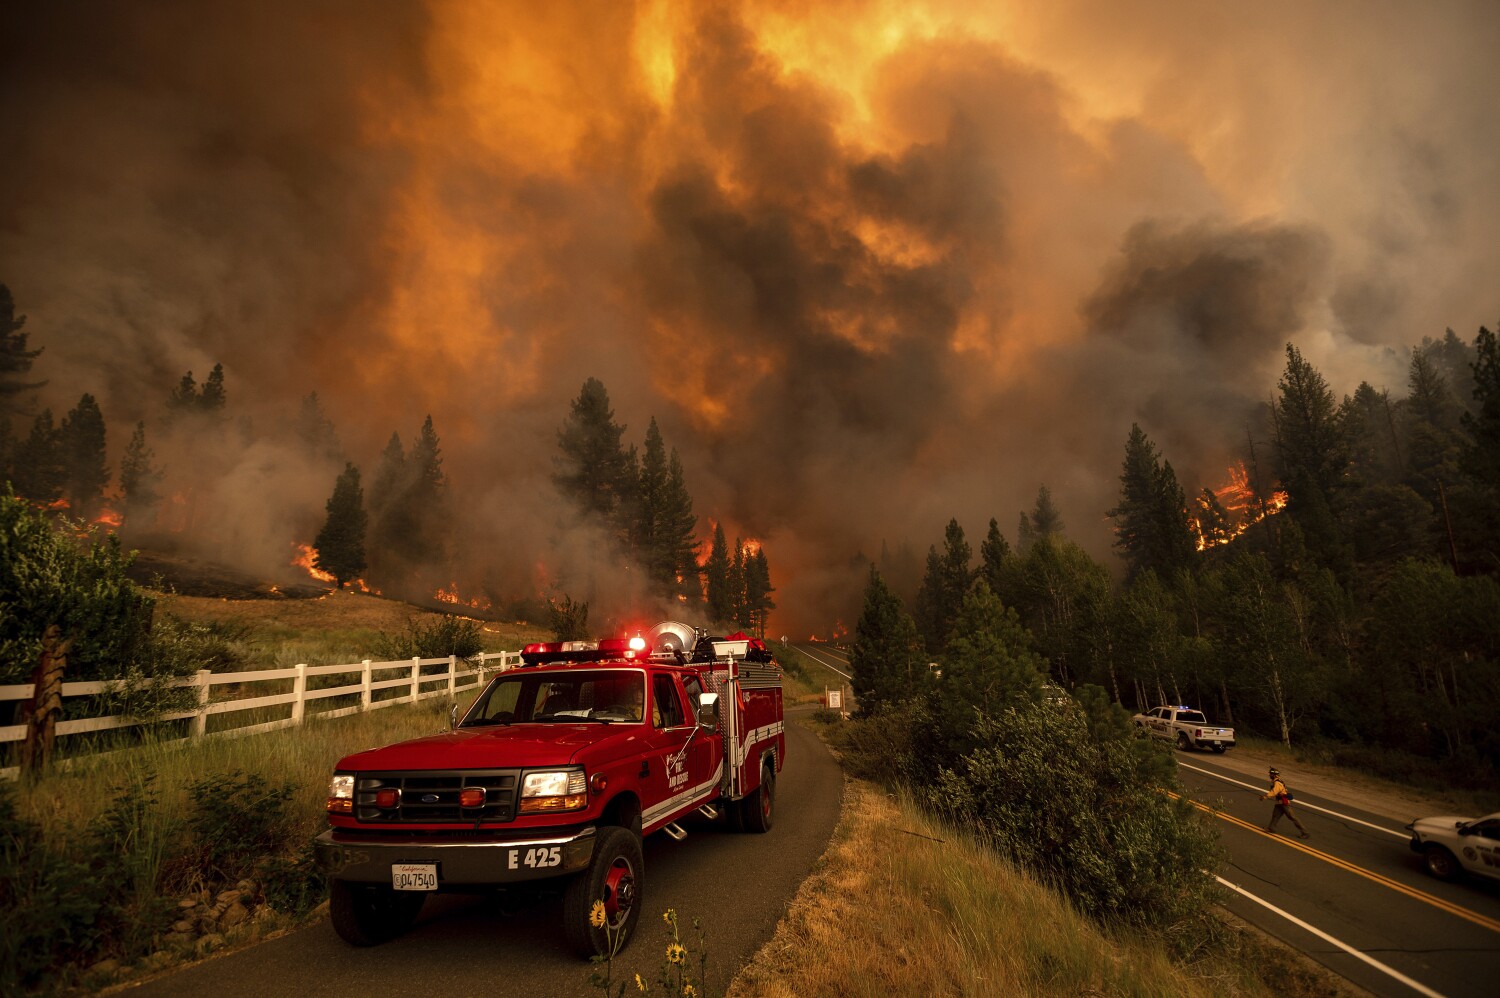 Dixie fire burns more than 100,000 acres while Tamarack fire crosses state lines